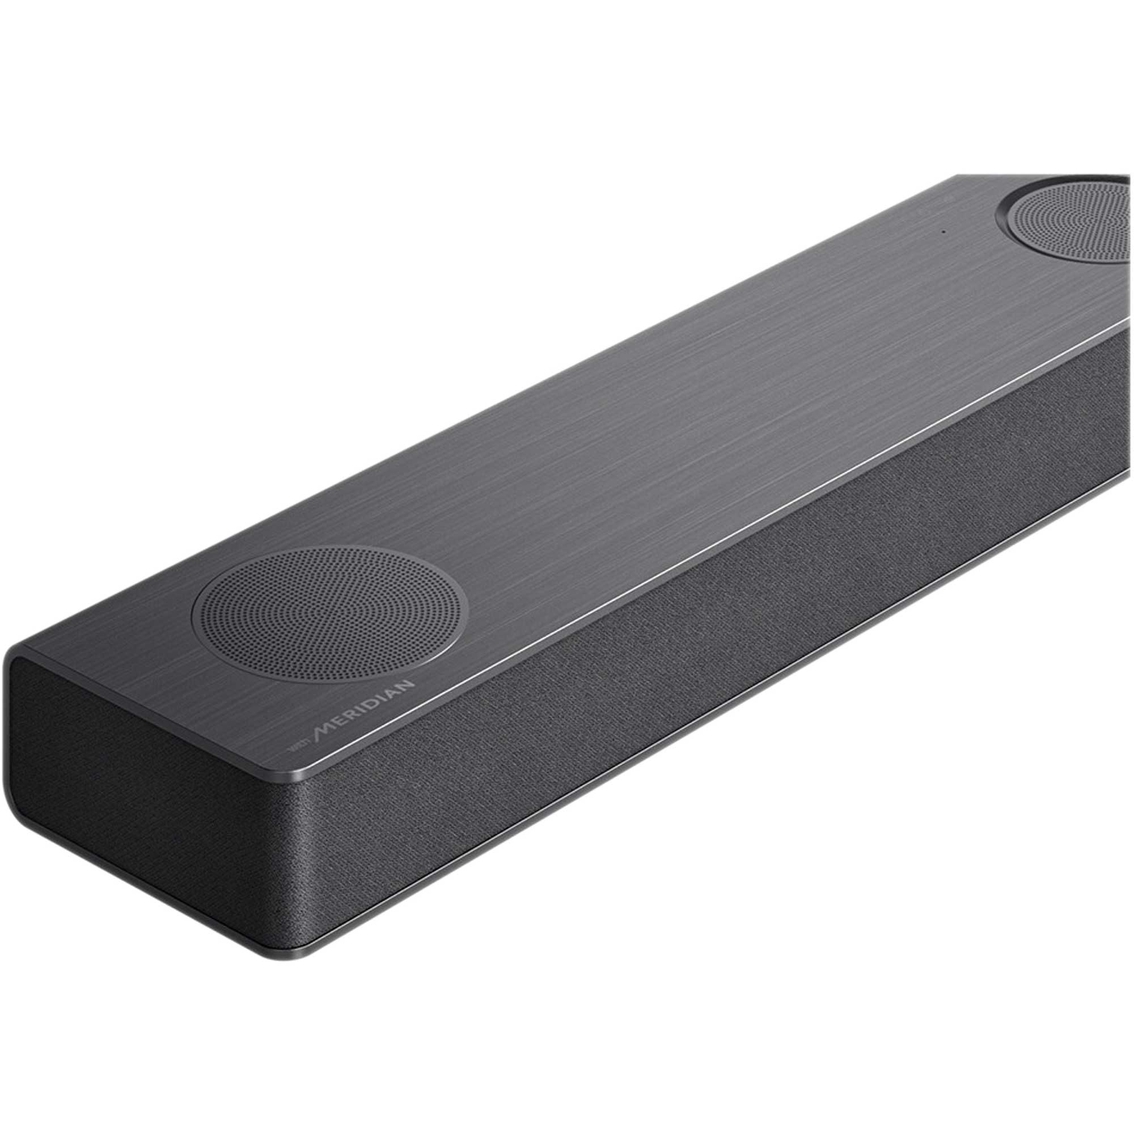 LG S80QY 3.1.2 Channel 480W High Res Sound Bar with Dolby Atmos and Apple Airplay 2 - Image 7 of 8